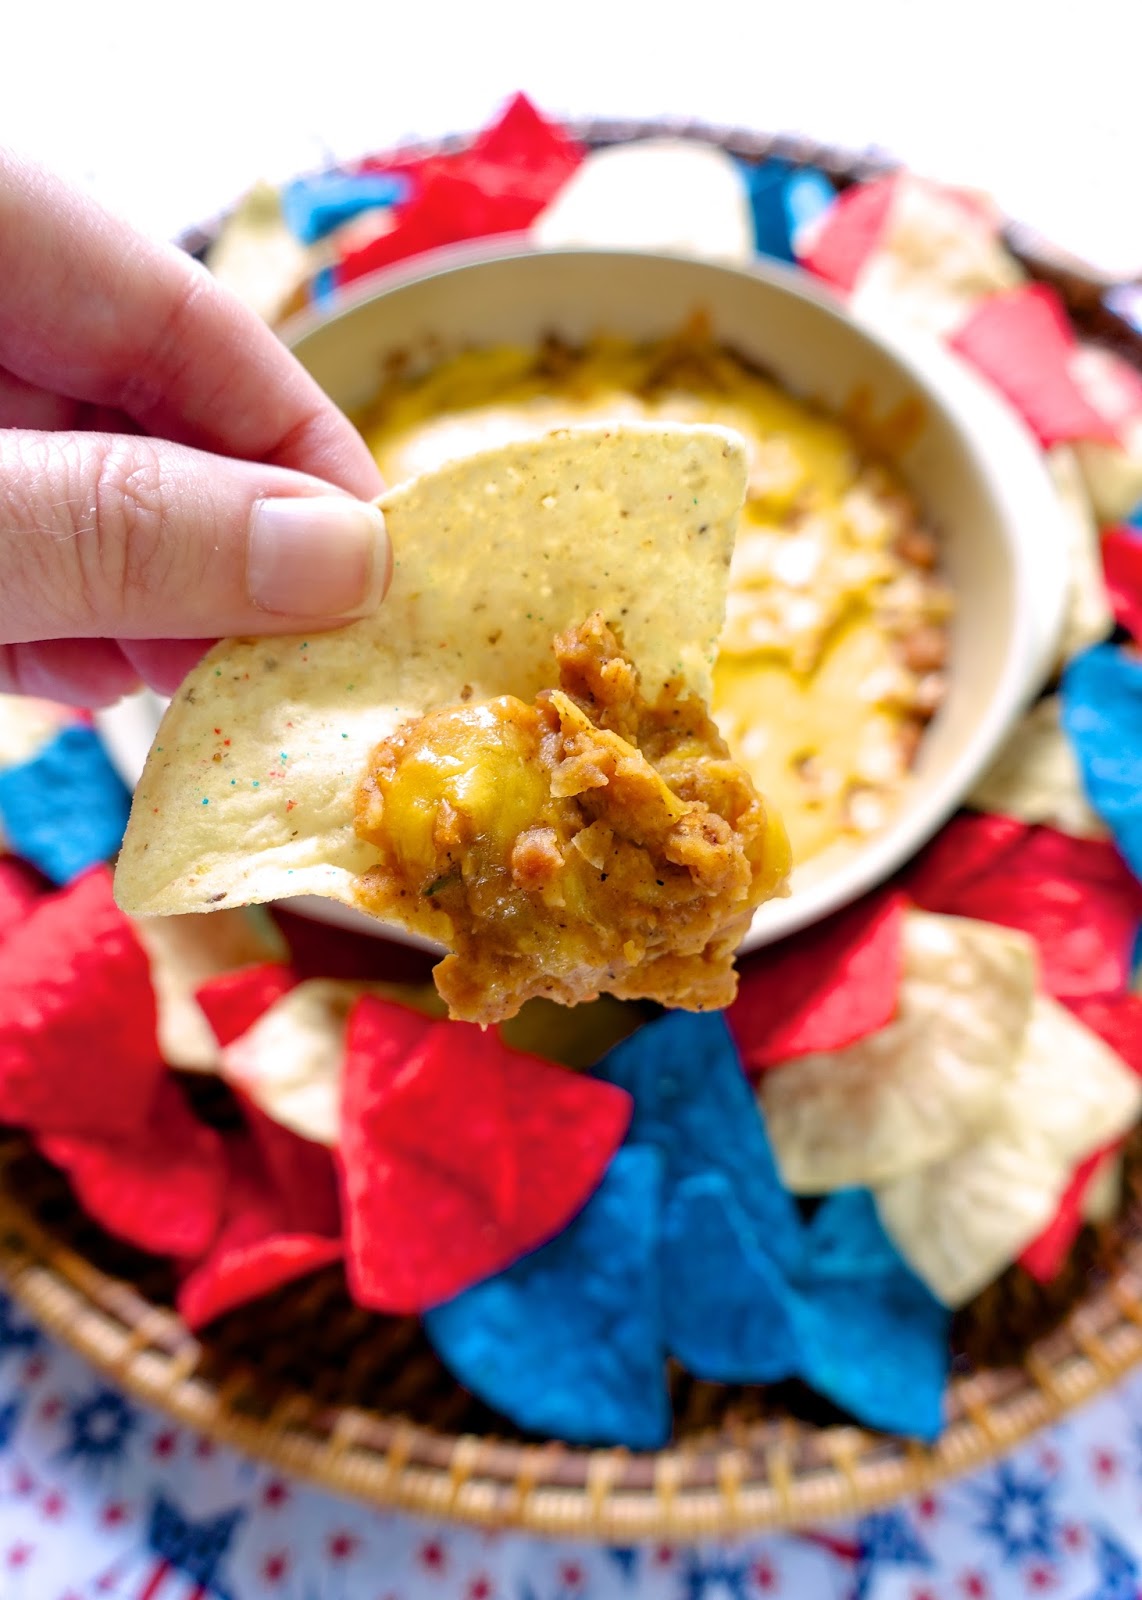 BBQ Bean Dip - only takes 5 minutes to make and it tastes delicious!!! Great for parties! Bacon, onion, Northern beans, BBQ sauce, garlic powder and cheddar cheese. Always the first thing to go at our parties!!